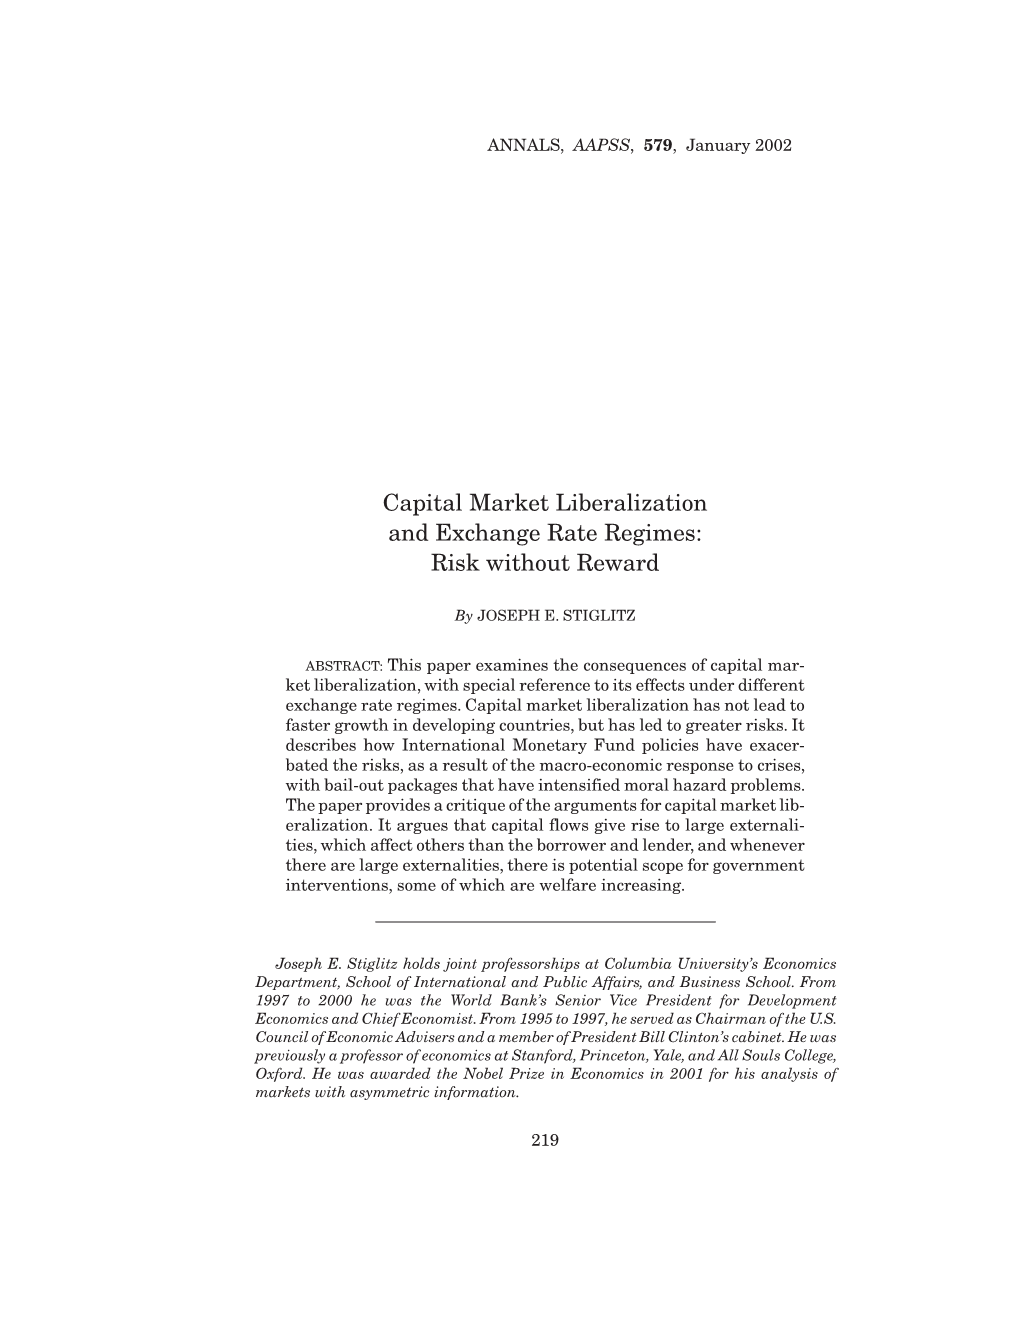 Capital Market Liberalization and Exchange Rate Regimes: Risk Without Reward